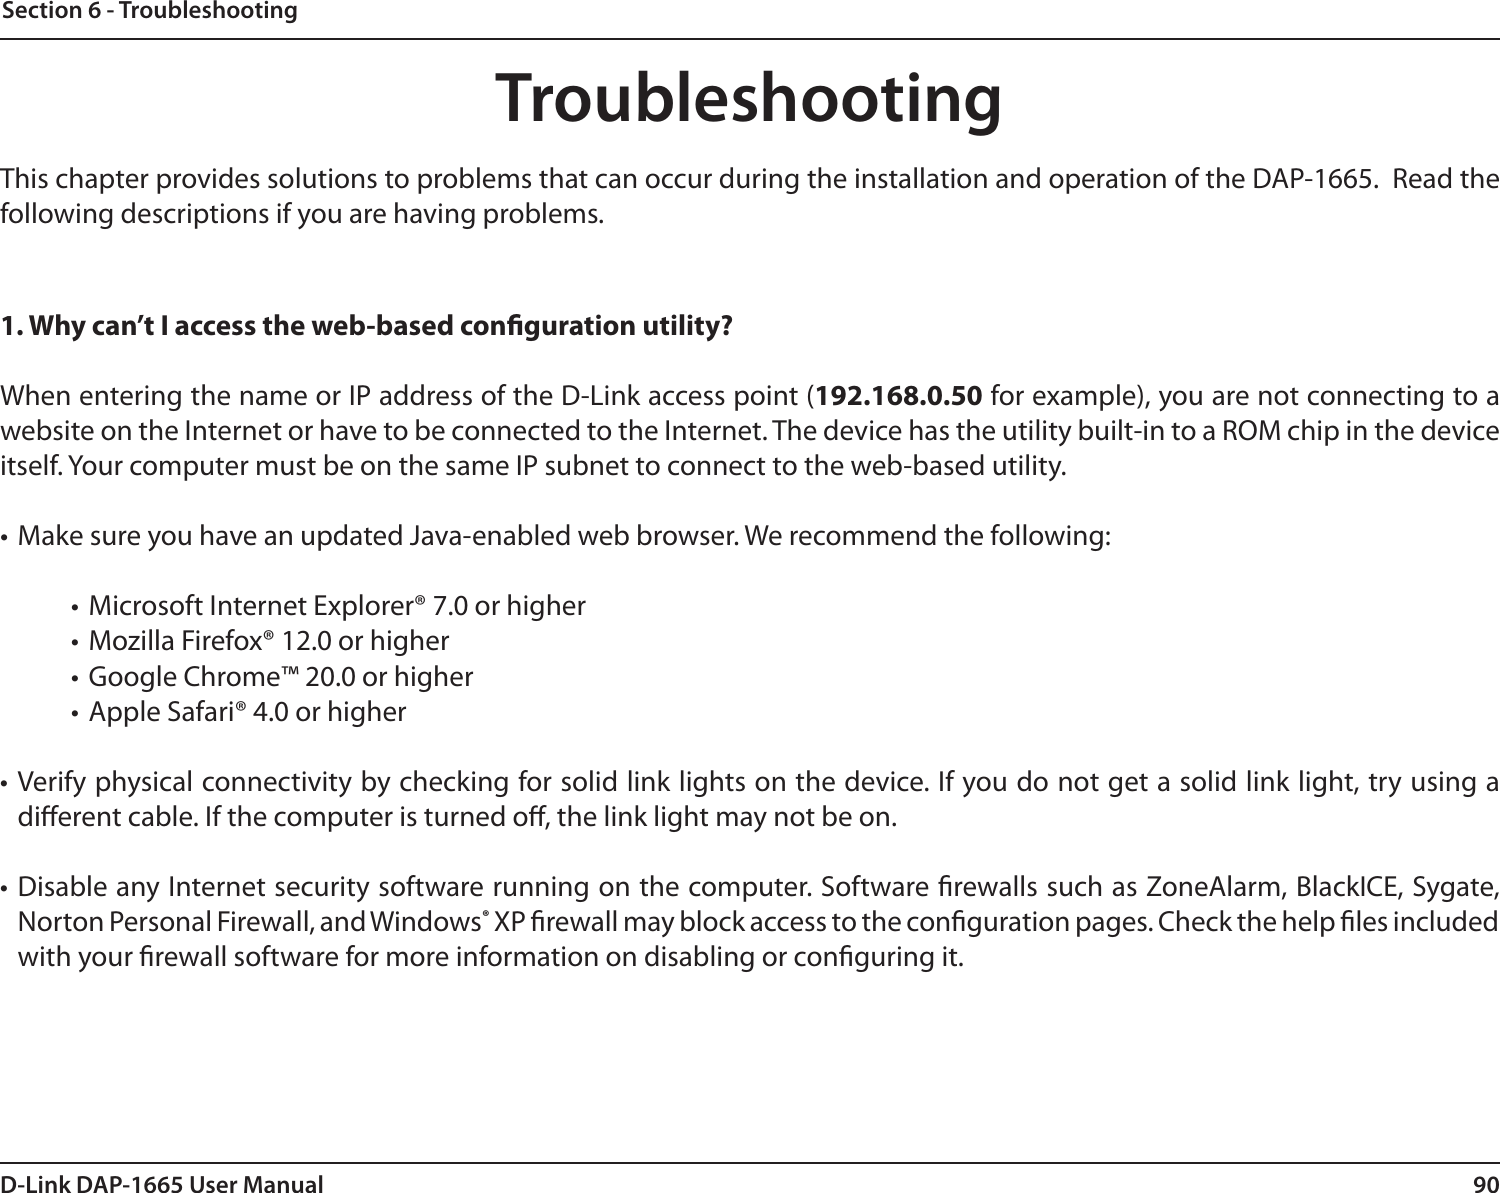 90D-Link DAP-1665 User ManualSection 6 - TroubleshootingTroubleshootingThis chapter provides solutions to problems that can occur during the installation and operation of the DAP-1665.  Read the following descriptions if you are having problems.1. Why can’t I access the web-based conguration utility?When entering the name or IP address of the D-Link access point (192.168.0.50 for example), you are not connecting to a website on the Internet or have to be connected to the Internet. The device has the utility built-in to a ROM chip in the device itself. Your computer must be on the same IP subnet to connect to the web-based utility. • Make sure you have an updated Java-enabled web browser. We recommend the following: • Microsoft Internet Explorer® 7.0 or higher• Mozilla Firefox® 12.0 or higher• Google Chrome™ 20.0 or higher• Apple Safari® 4.0 or higher• Verify physical connectivity by checking for solid link lights on the device. If you do not get a solid link light, try using a dierent cable. If the computer is turned o, the link light may not be on.• Disable any Internet security software running on the computer. Software rewalls such as ZoneAlarm, BlackICE, Sygate, Norton Personal Firewall, and Windows® XP rewall may block access to the conguration pages. Check the help les included with your rewall software for more information on disabling or conguring it.